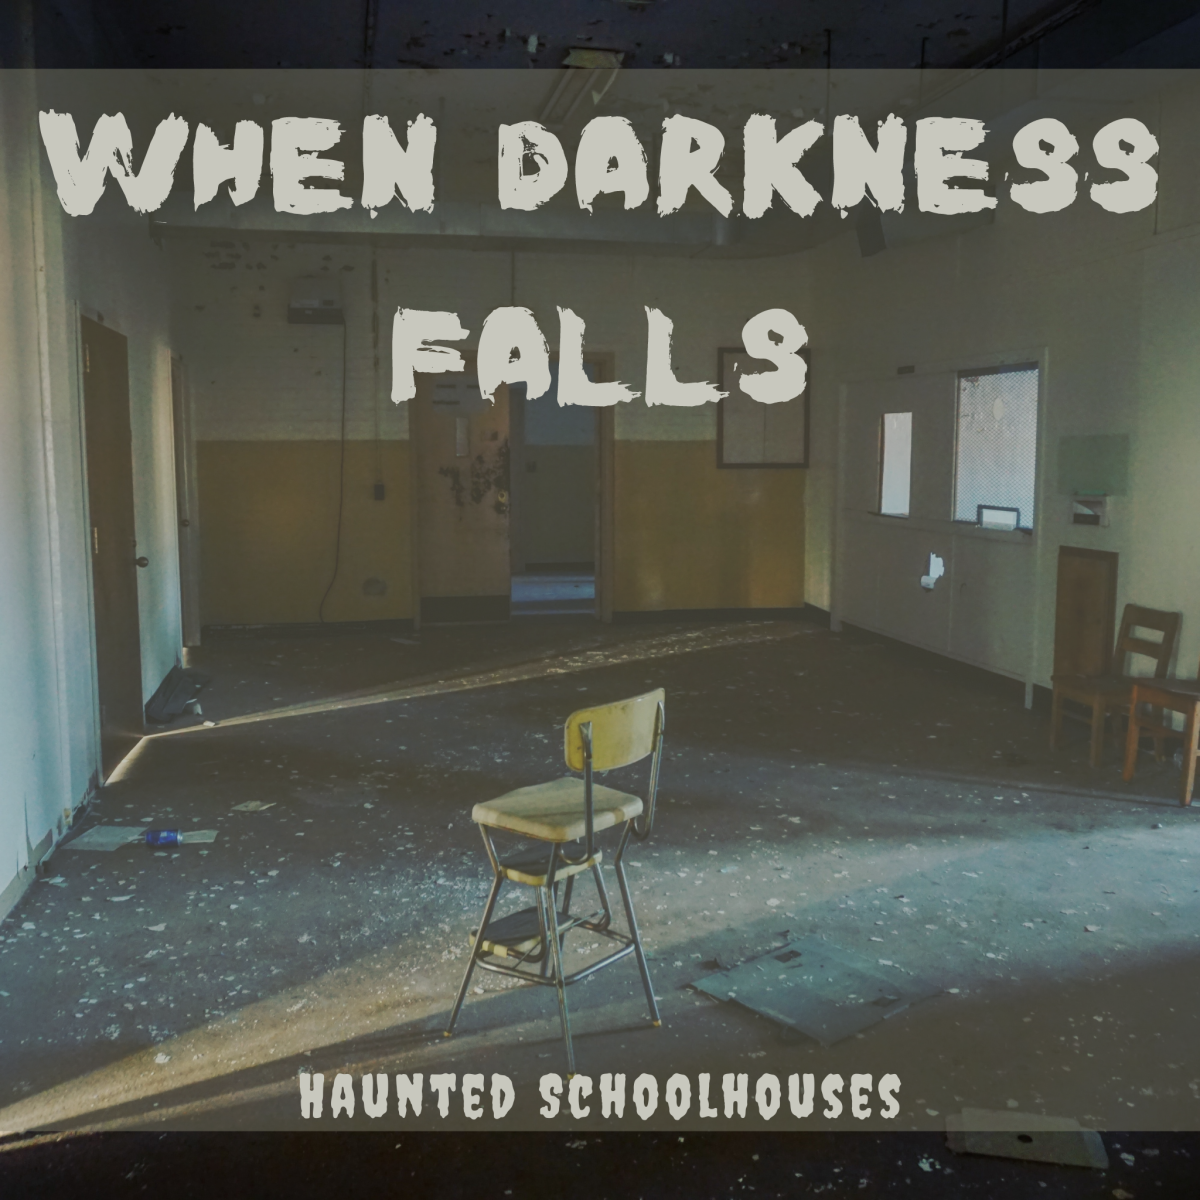 Here are two stories of haunted schoolhouses. 